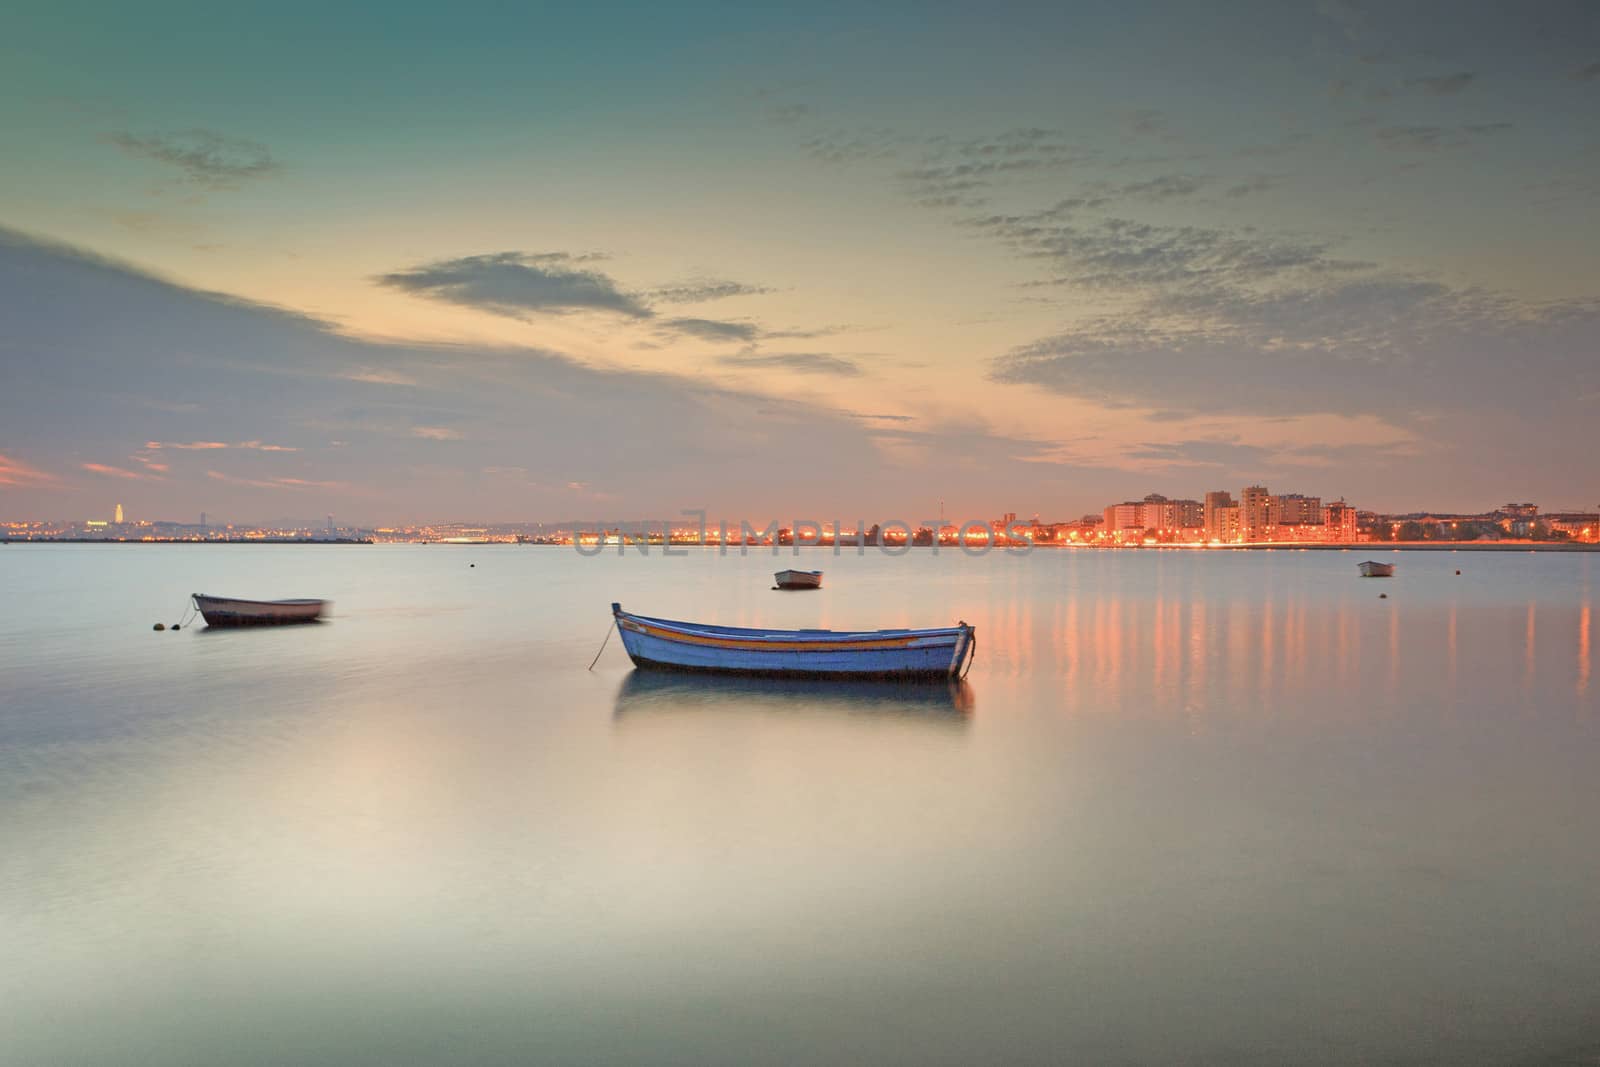 Sunset on the Tejo river. by Carpeira